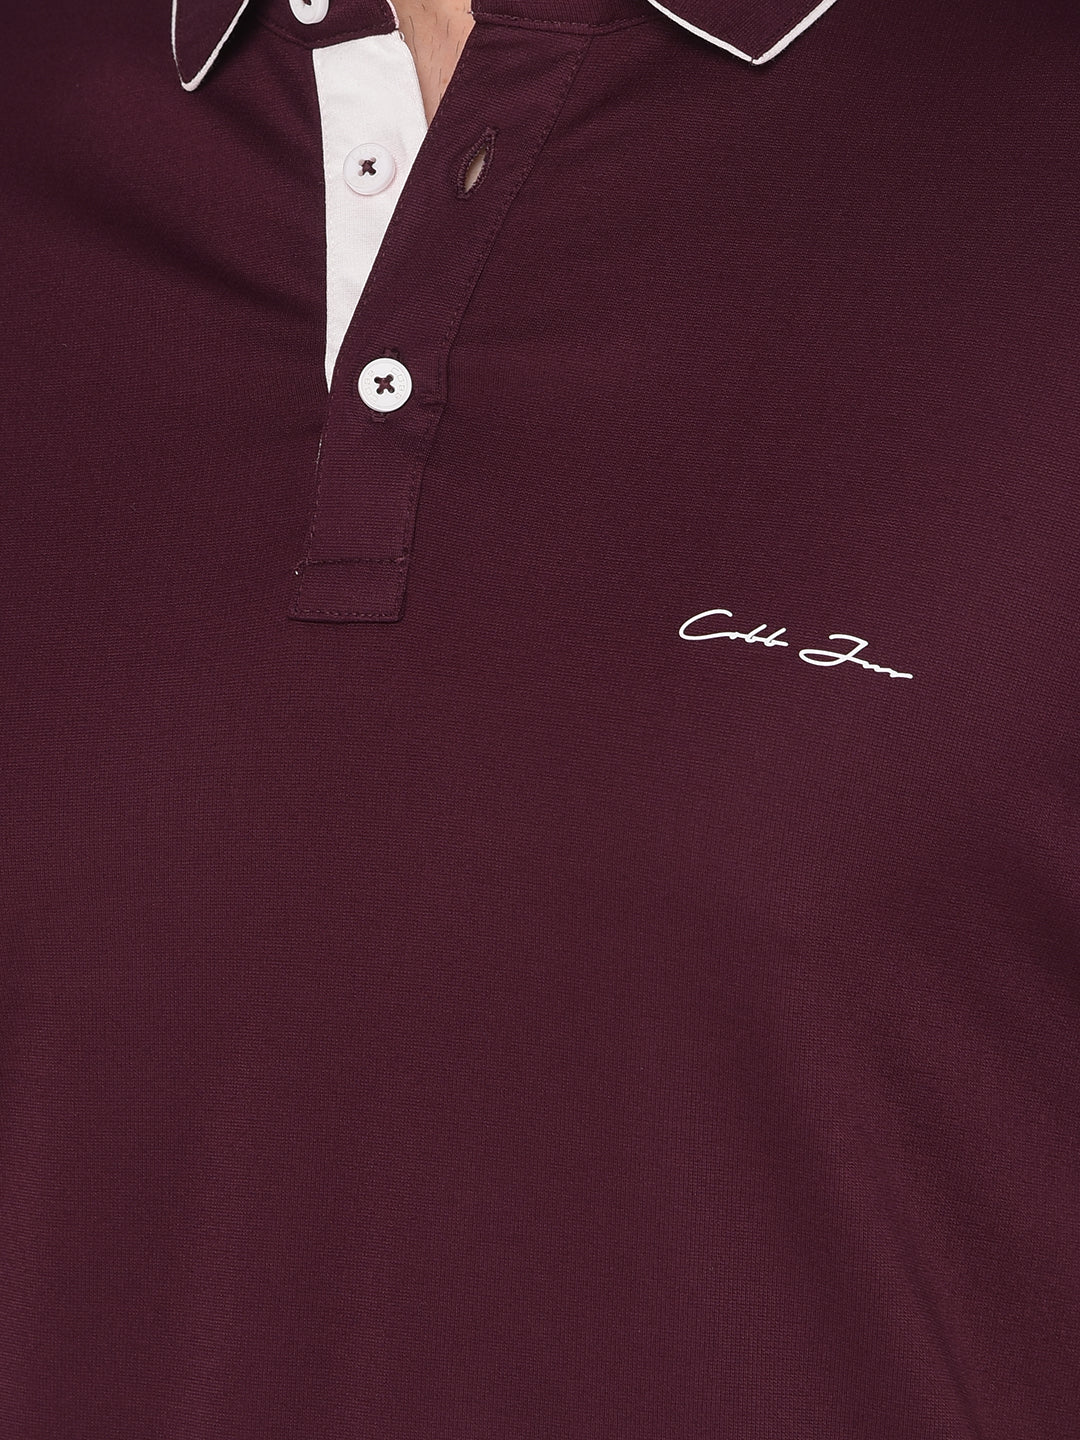 COBB SOLID WINE POLO NECK T-SHIRT